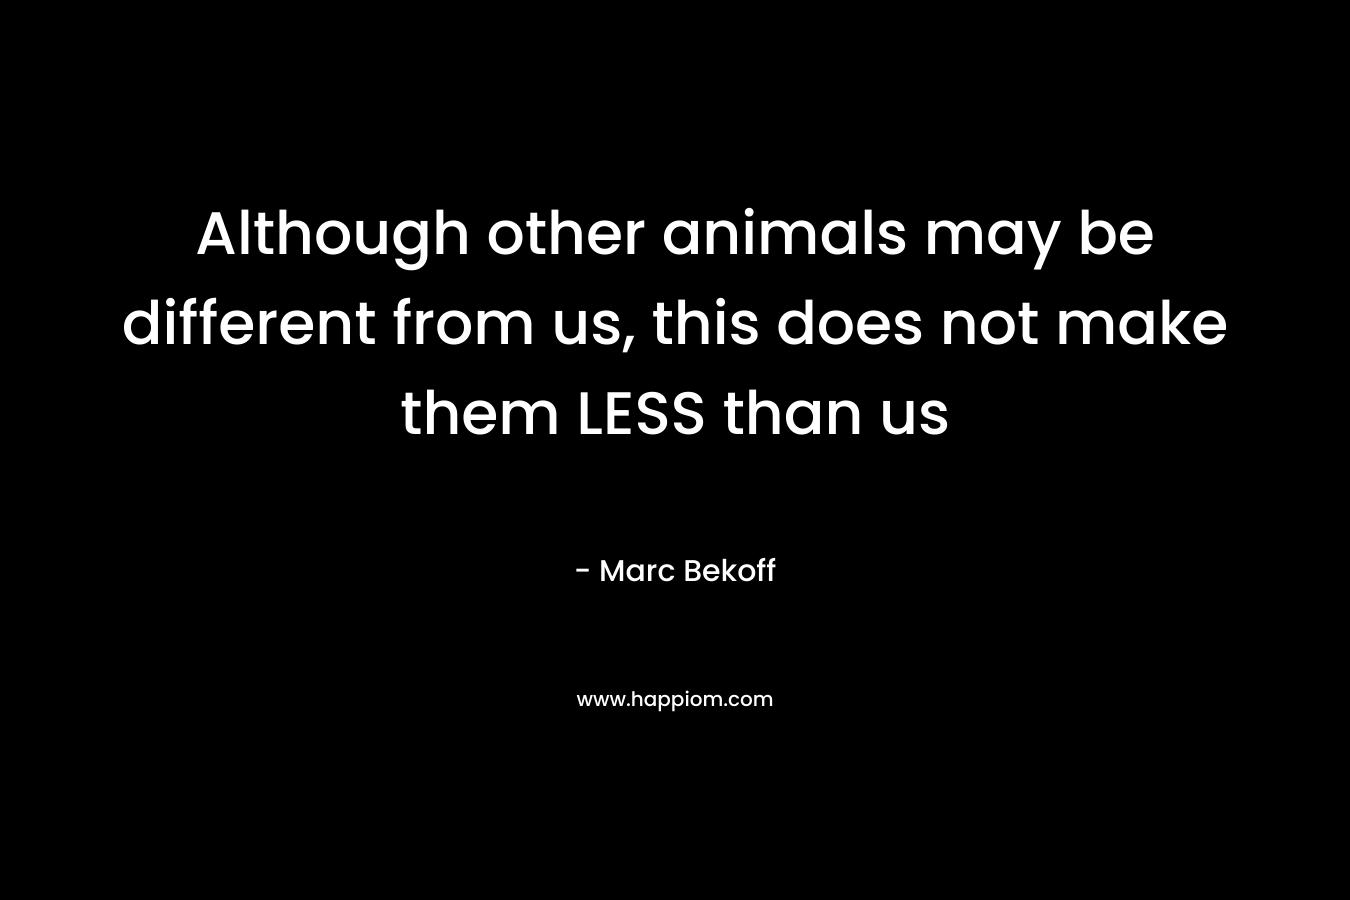 Although other animals may be different from us, this does not make them LESS than us – Marc Bekoff